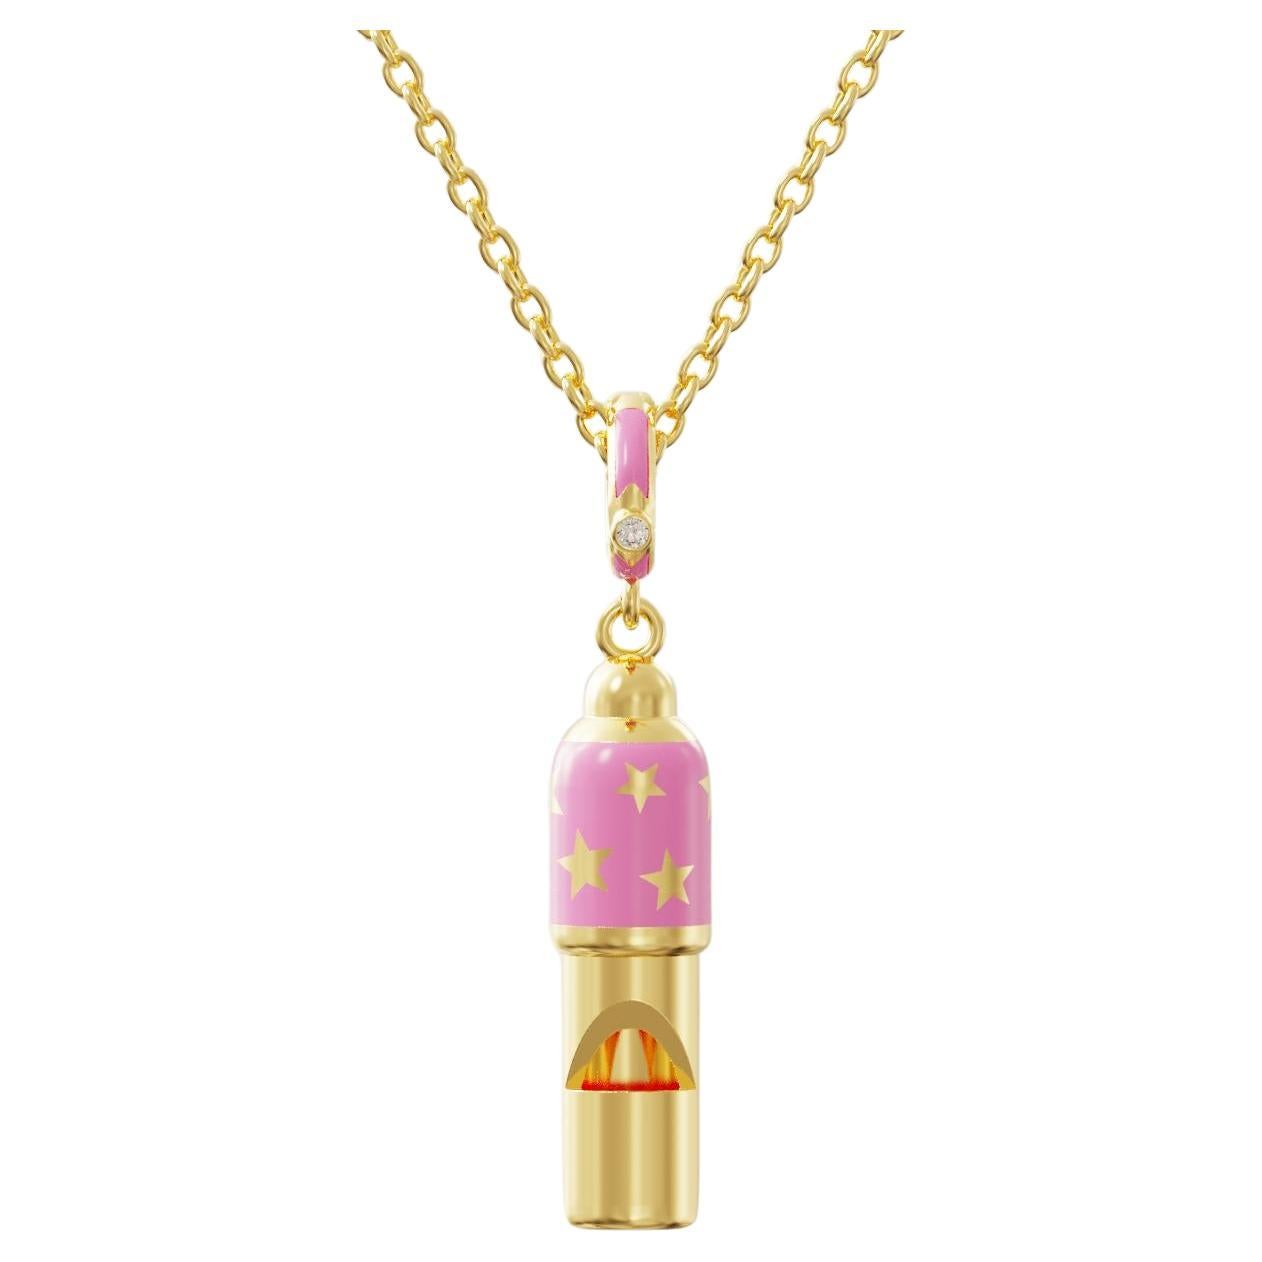 Small Gold Whistle Pendant Necklace, Pink Enamel For Sale